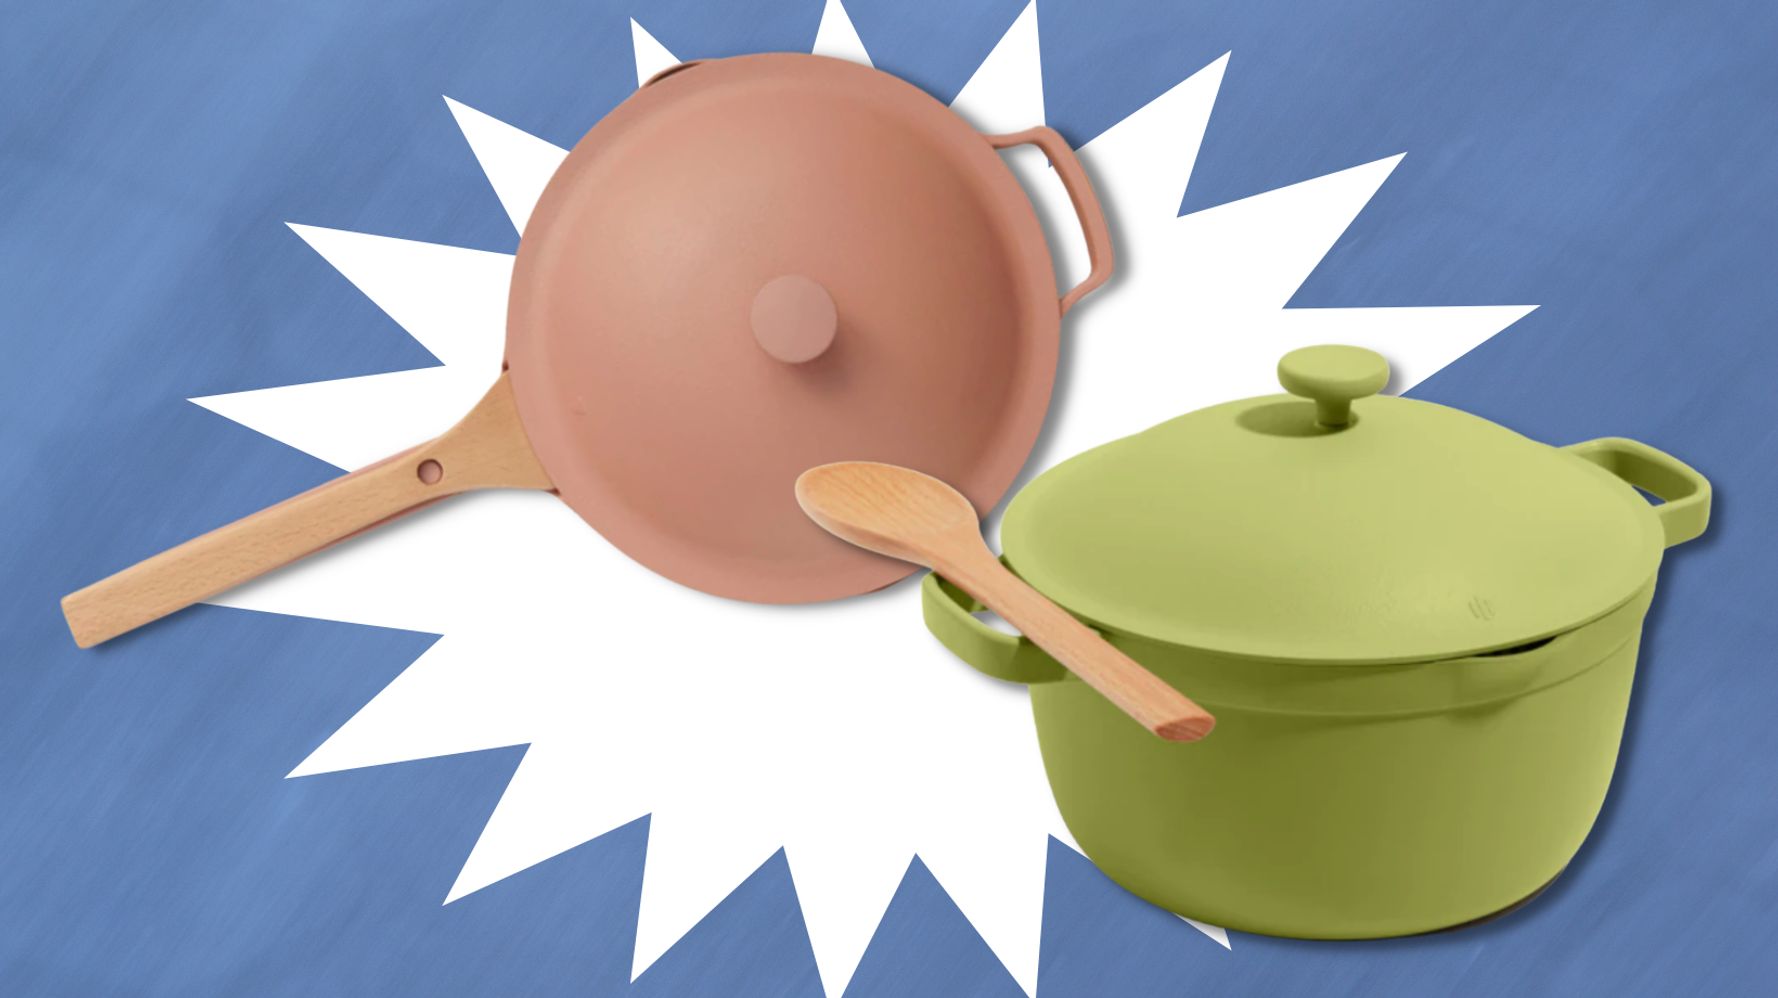 Our Place sale: Save big on this Always Pan, Perfect Pot bundle